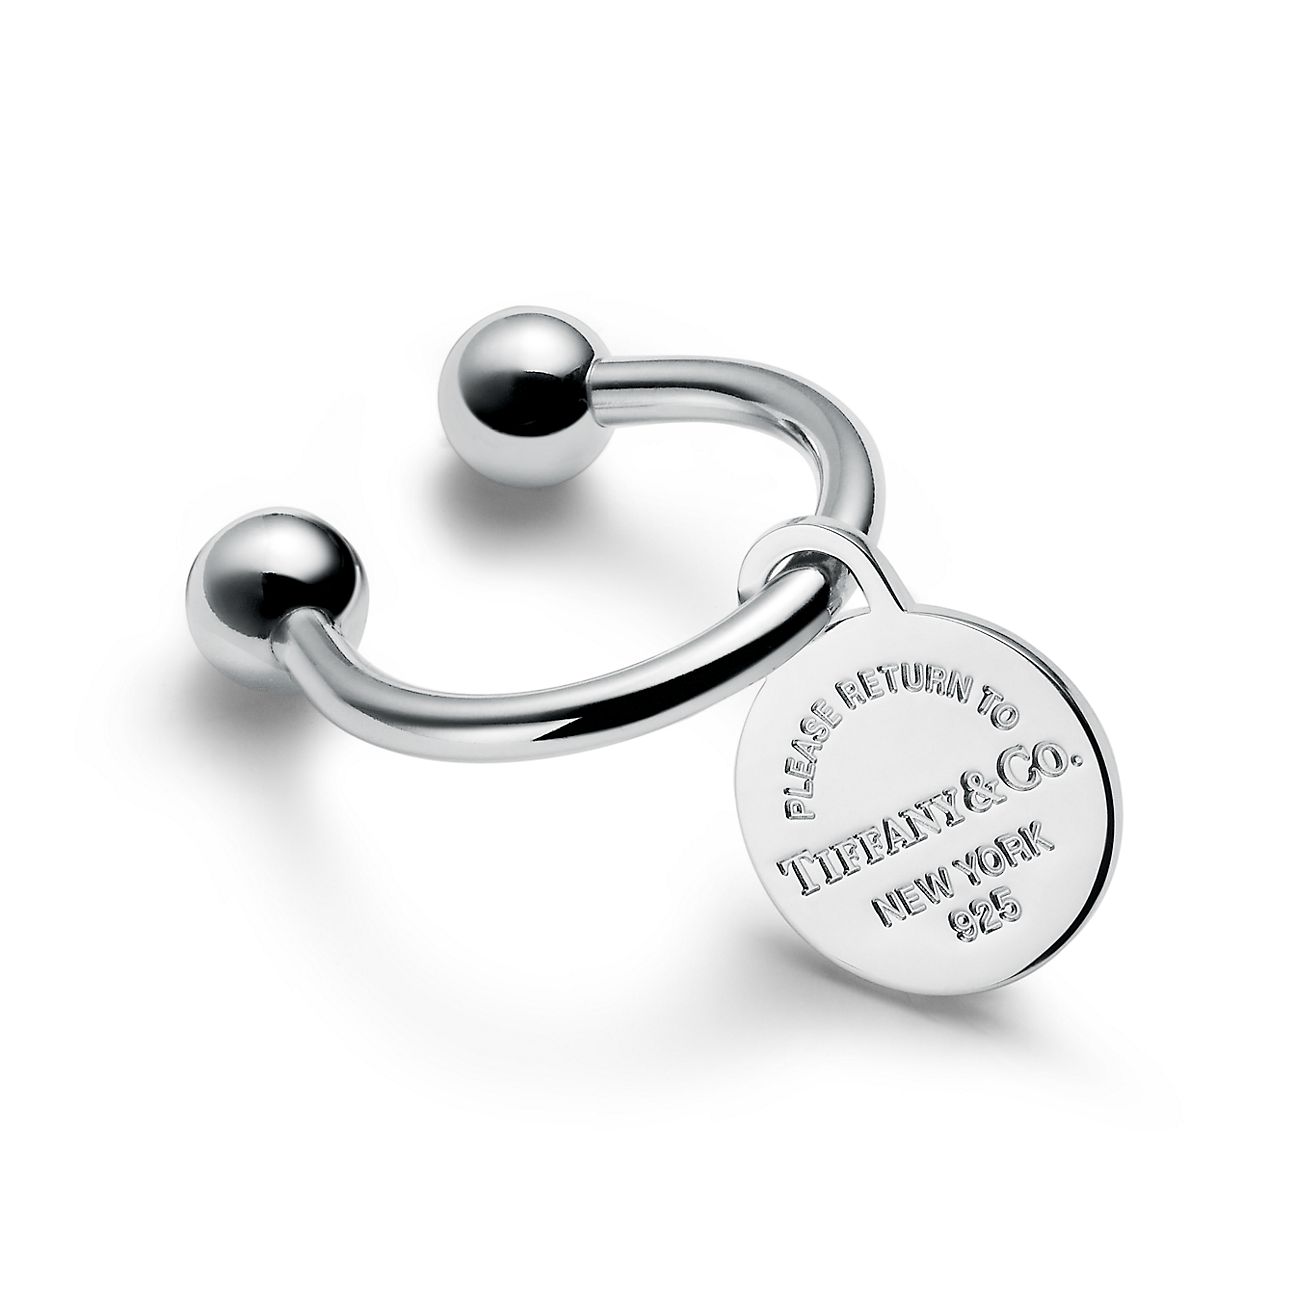 Return to Tiffany™ Round Tag Screwball Key Ring in Sterling Silver 